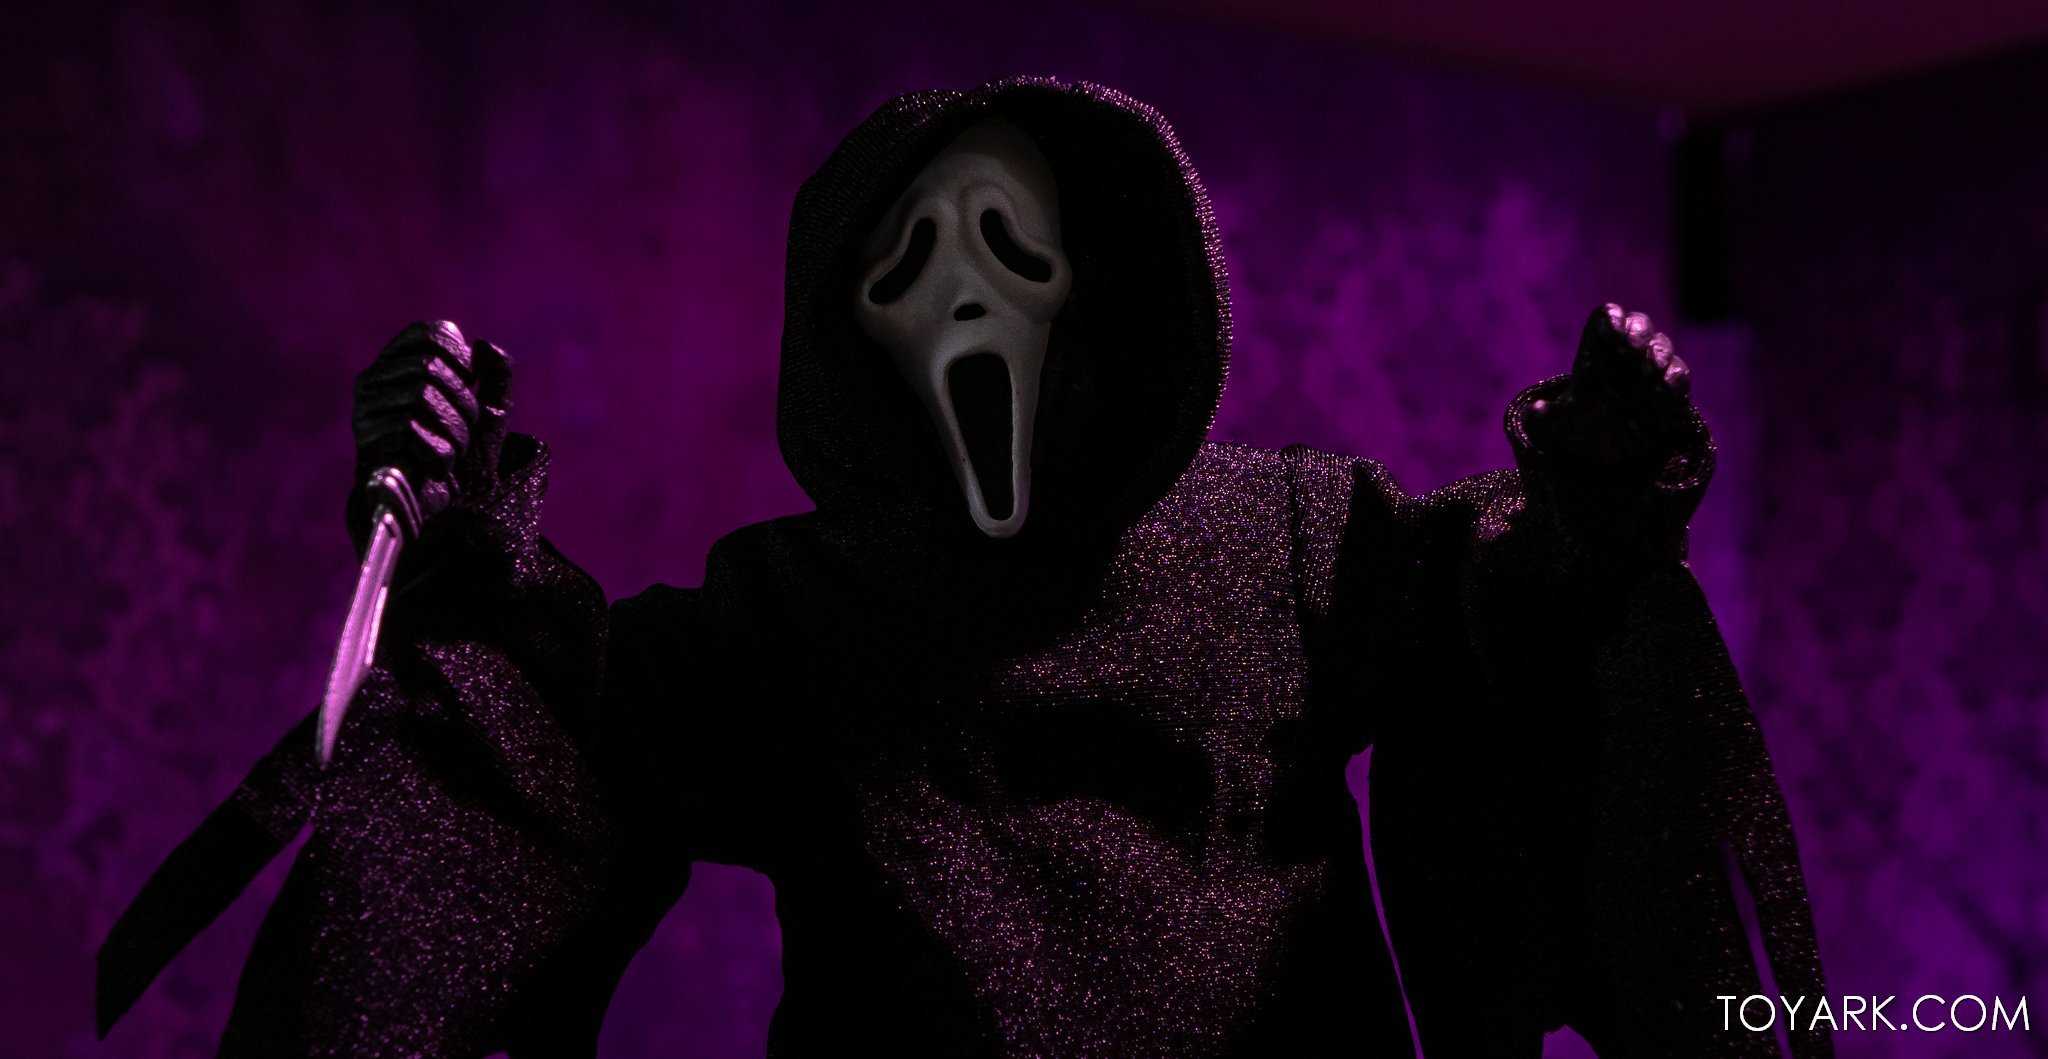 Scream Face 8 Inch Scale Clothed Figure By NECA Toys Photo Shoot